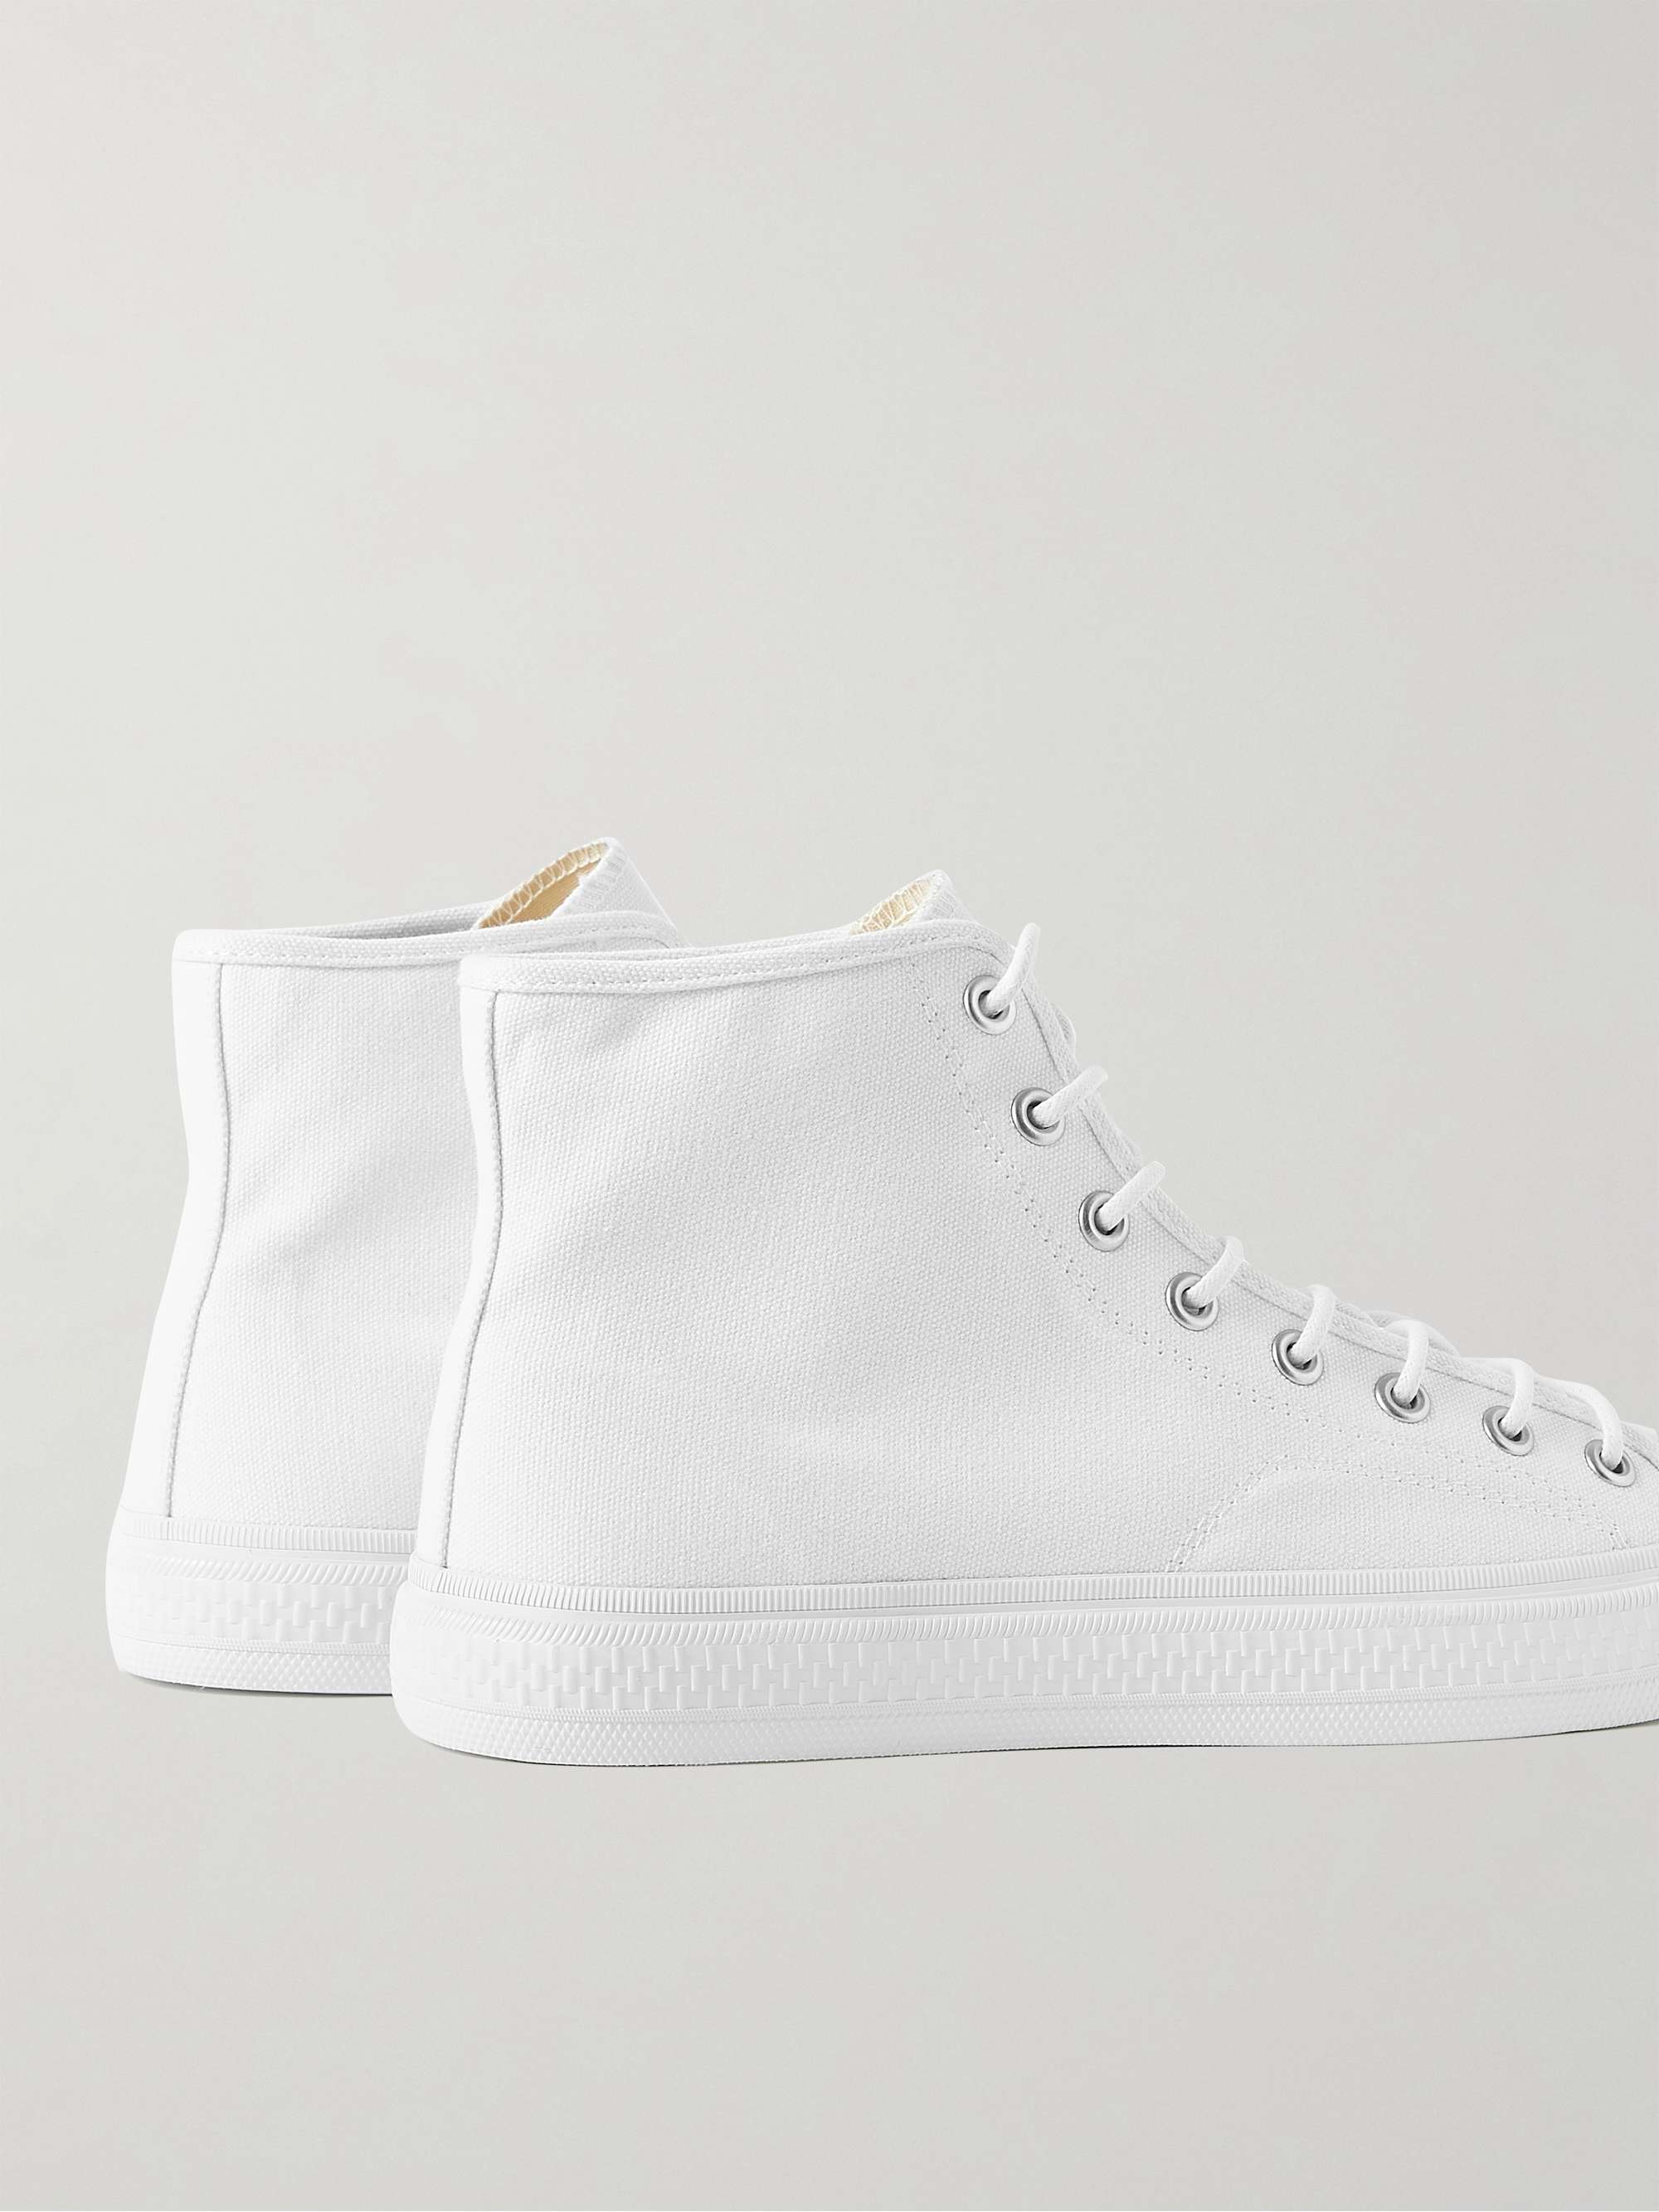 ACNE STUDIOS Rubber-Trimmed Canvas High-Top Sneakers